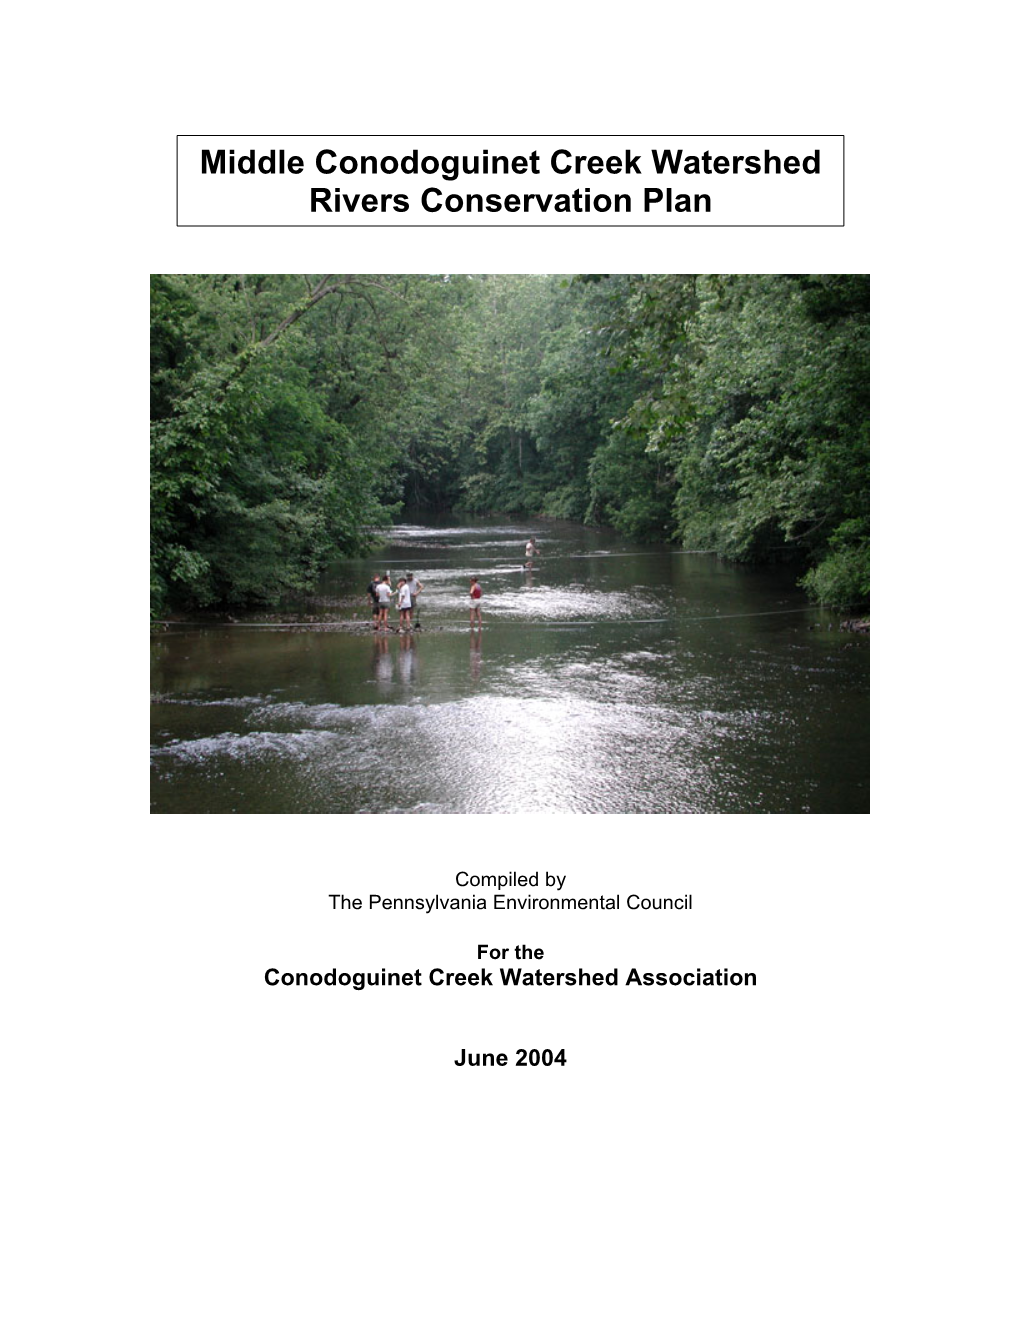 Middle Conodoguinet Creek Watershed Rivers Conservation Plan